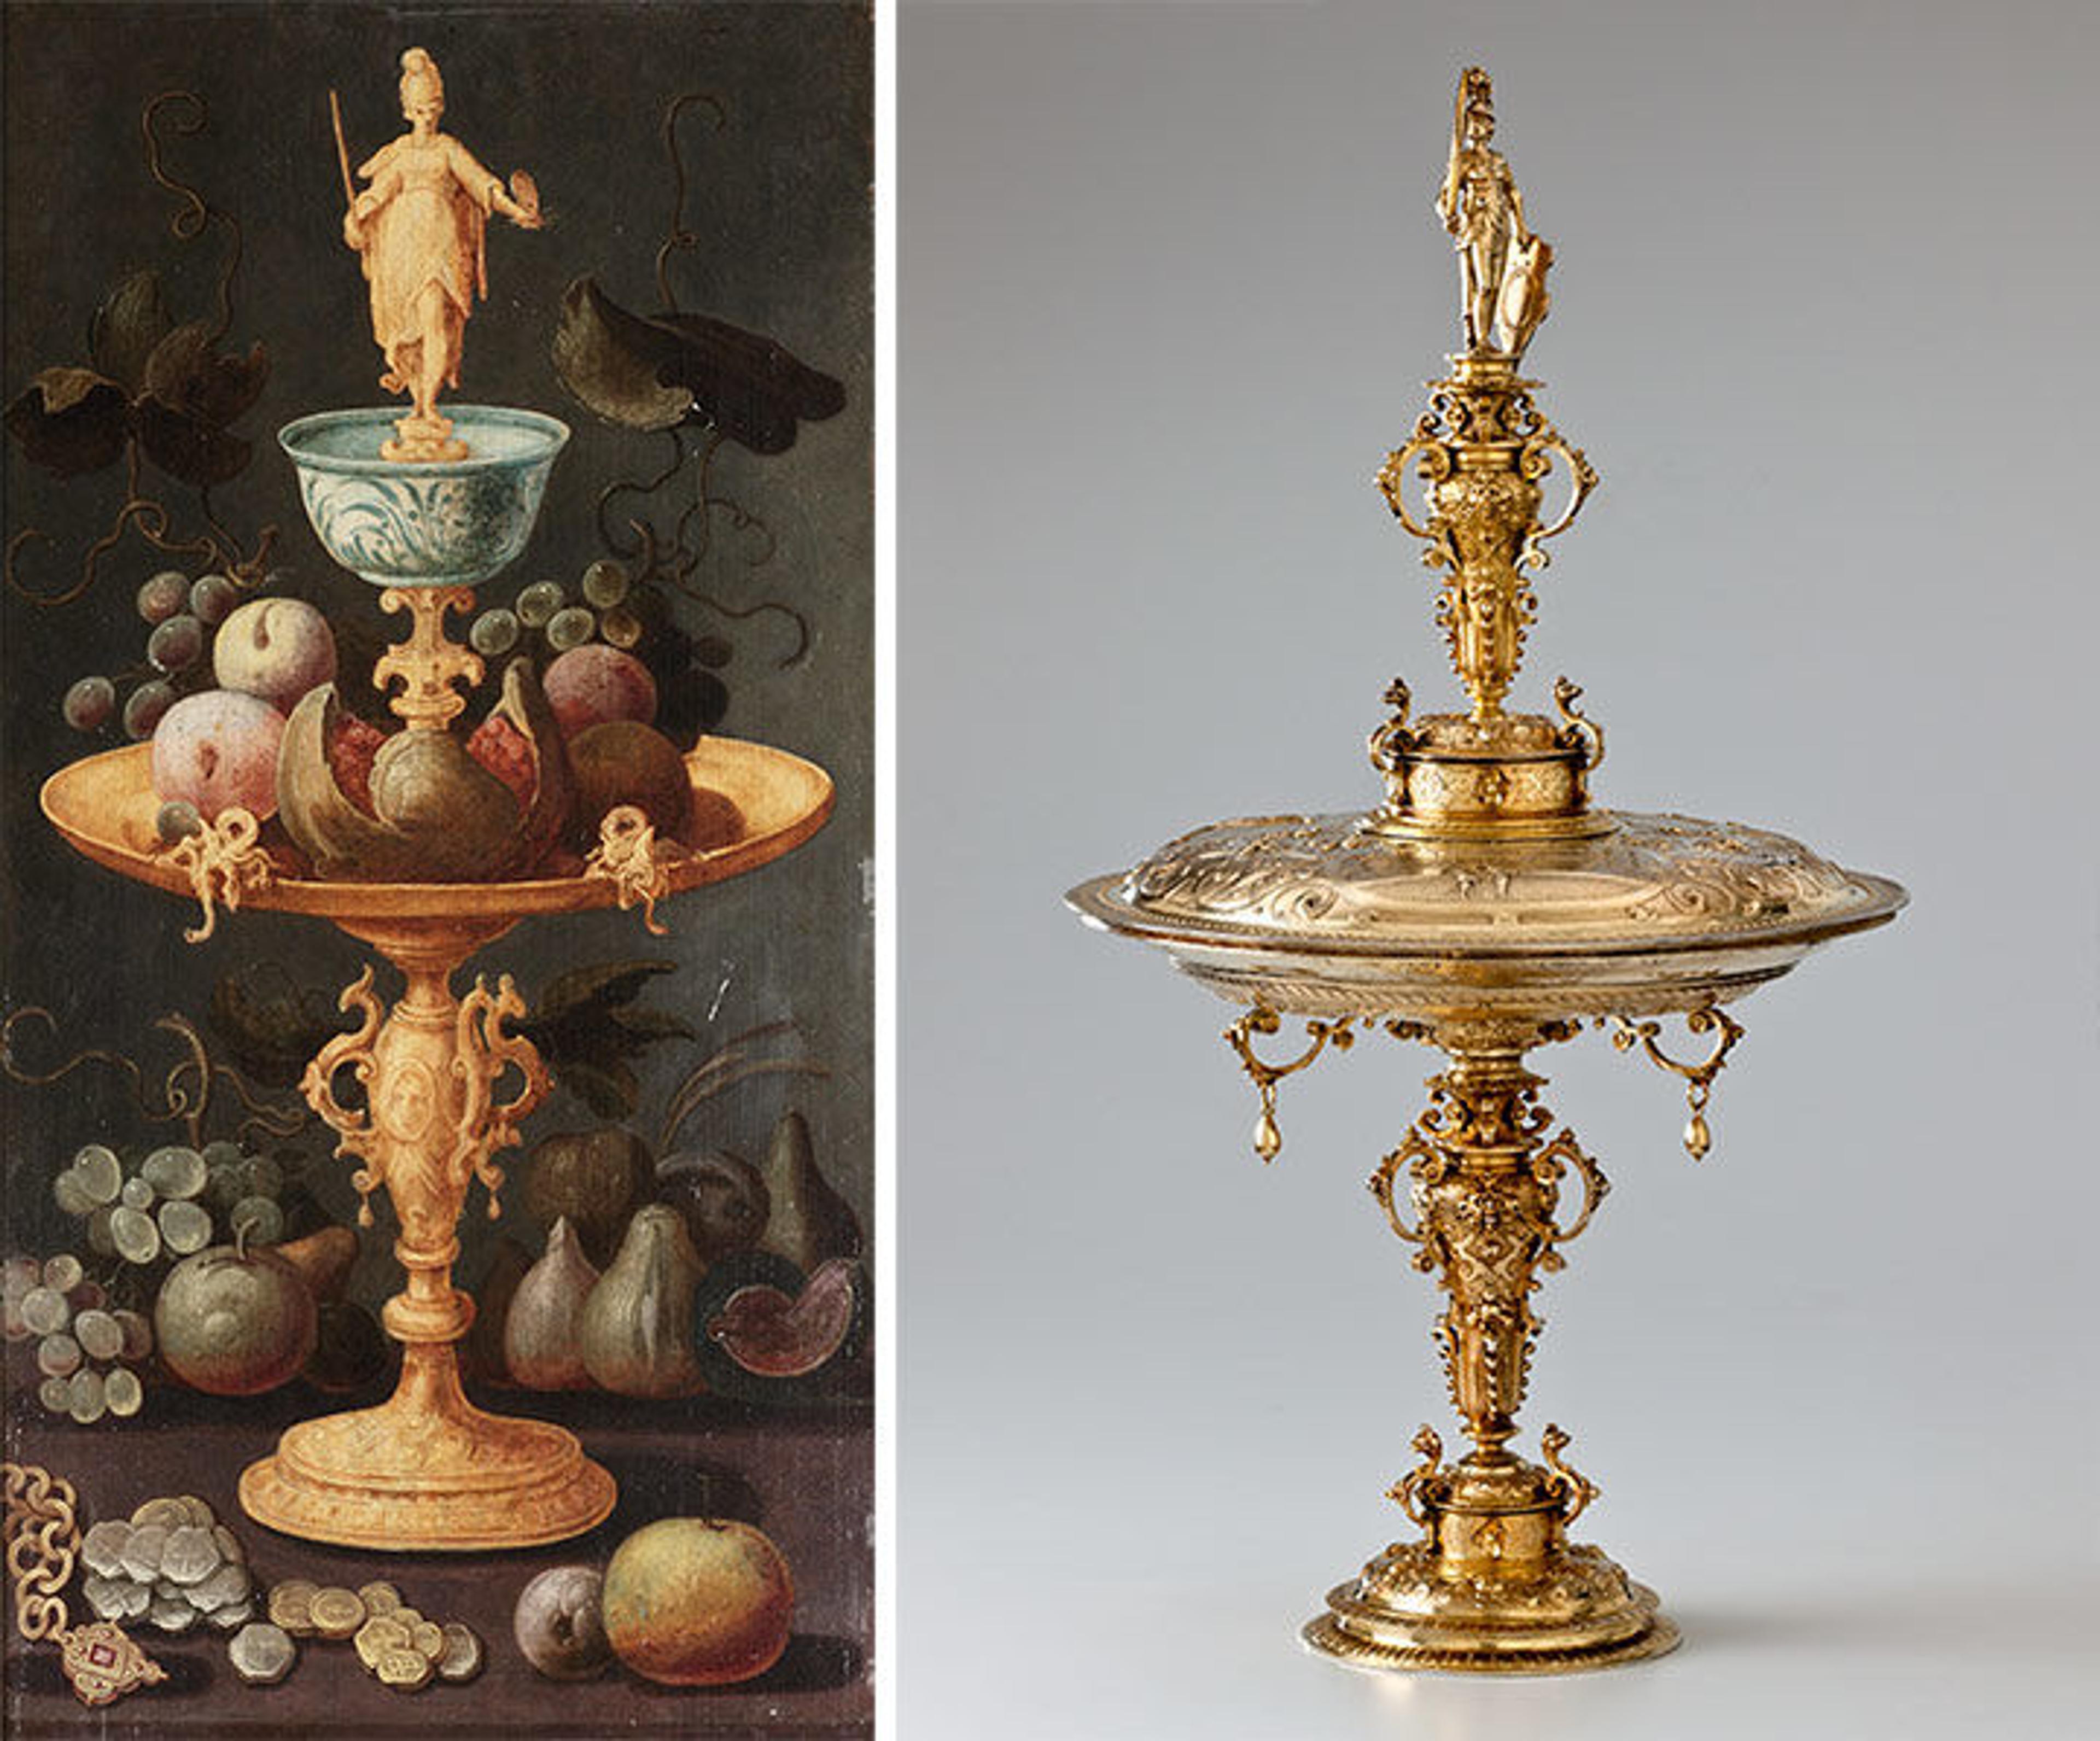 A painting of a gilded cup and a gilded Habsburg cup